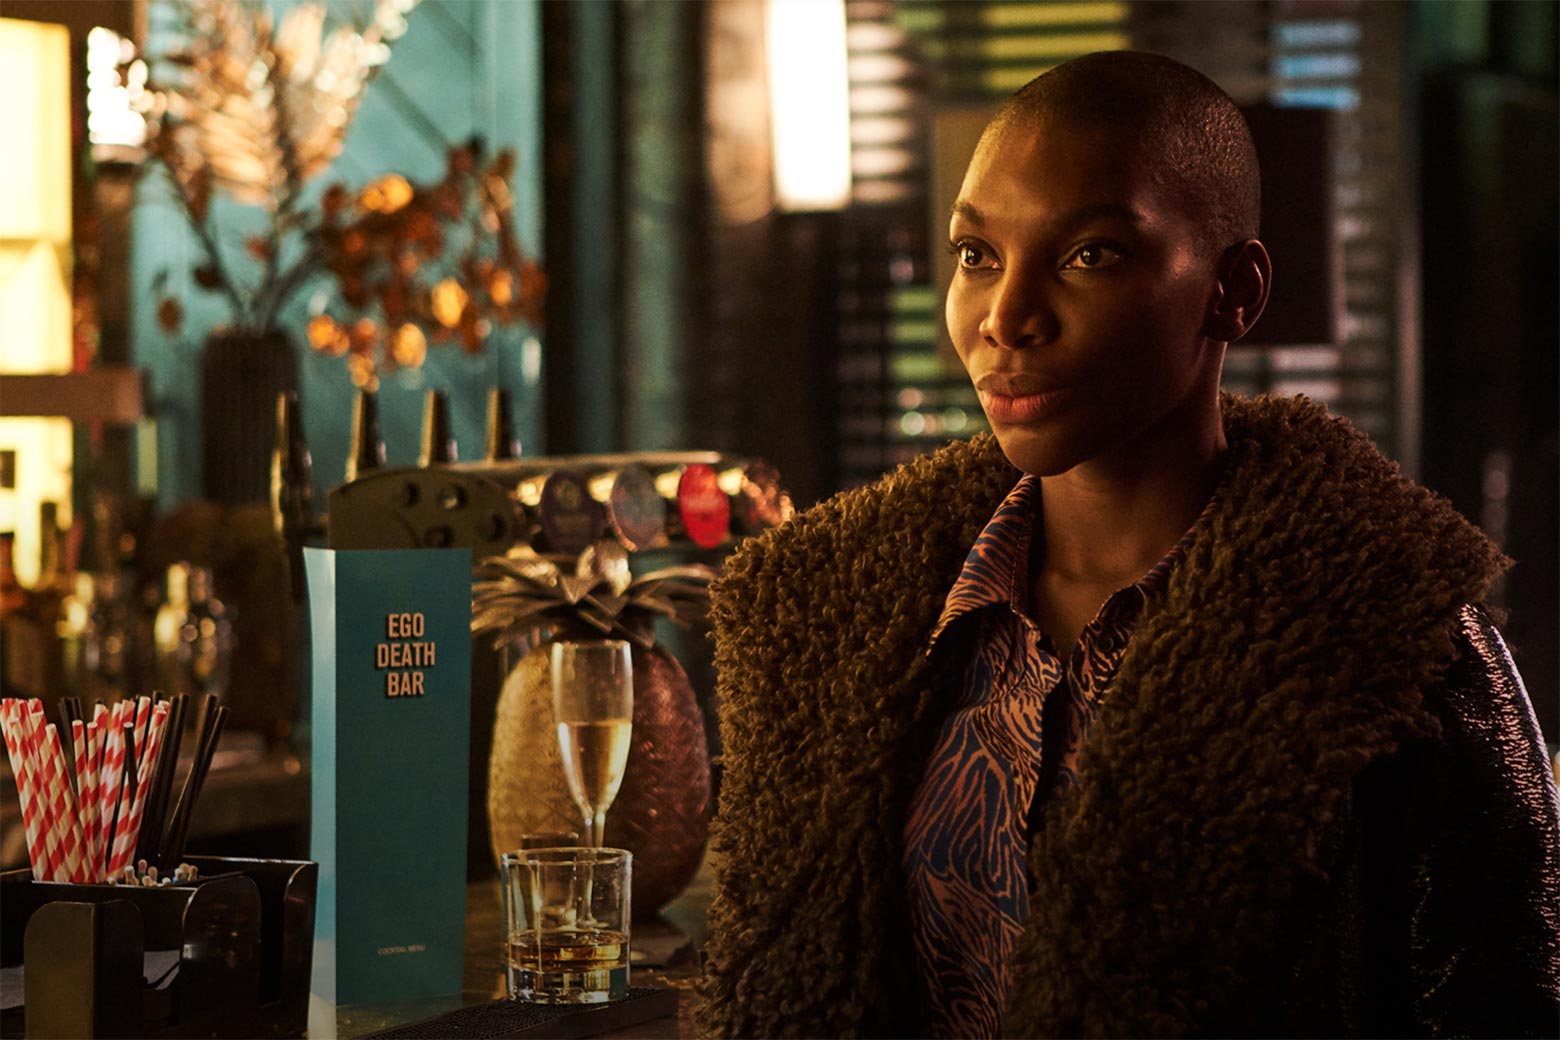 Black woman in a coat looking upset in front of a bar.